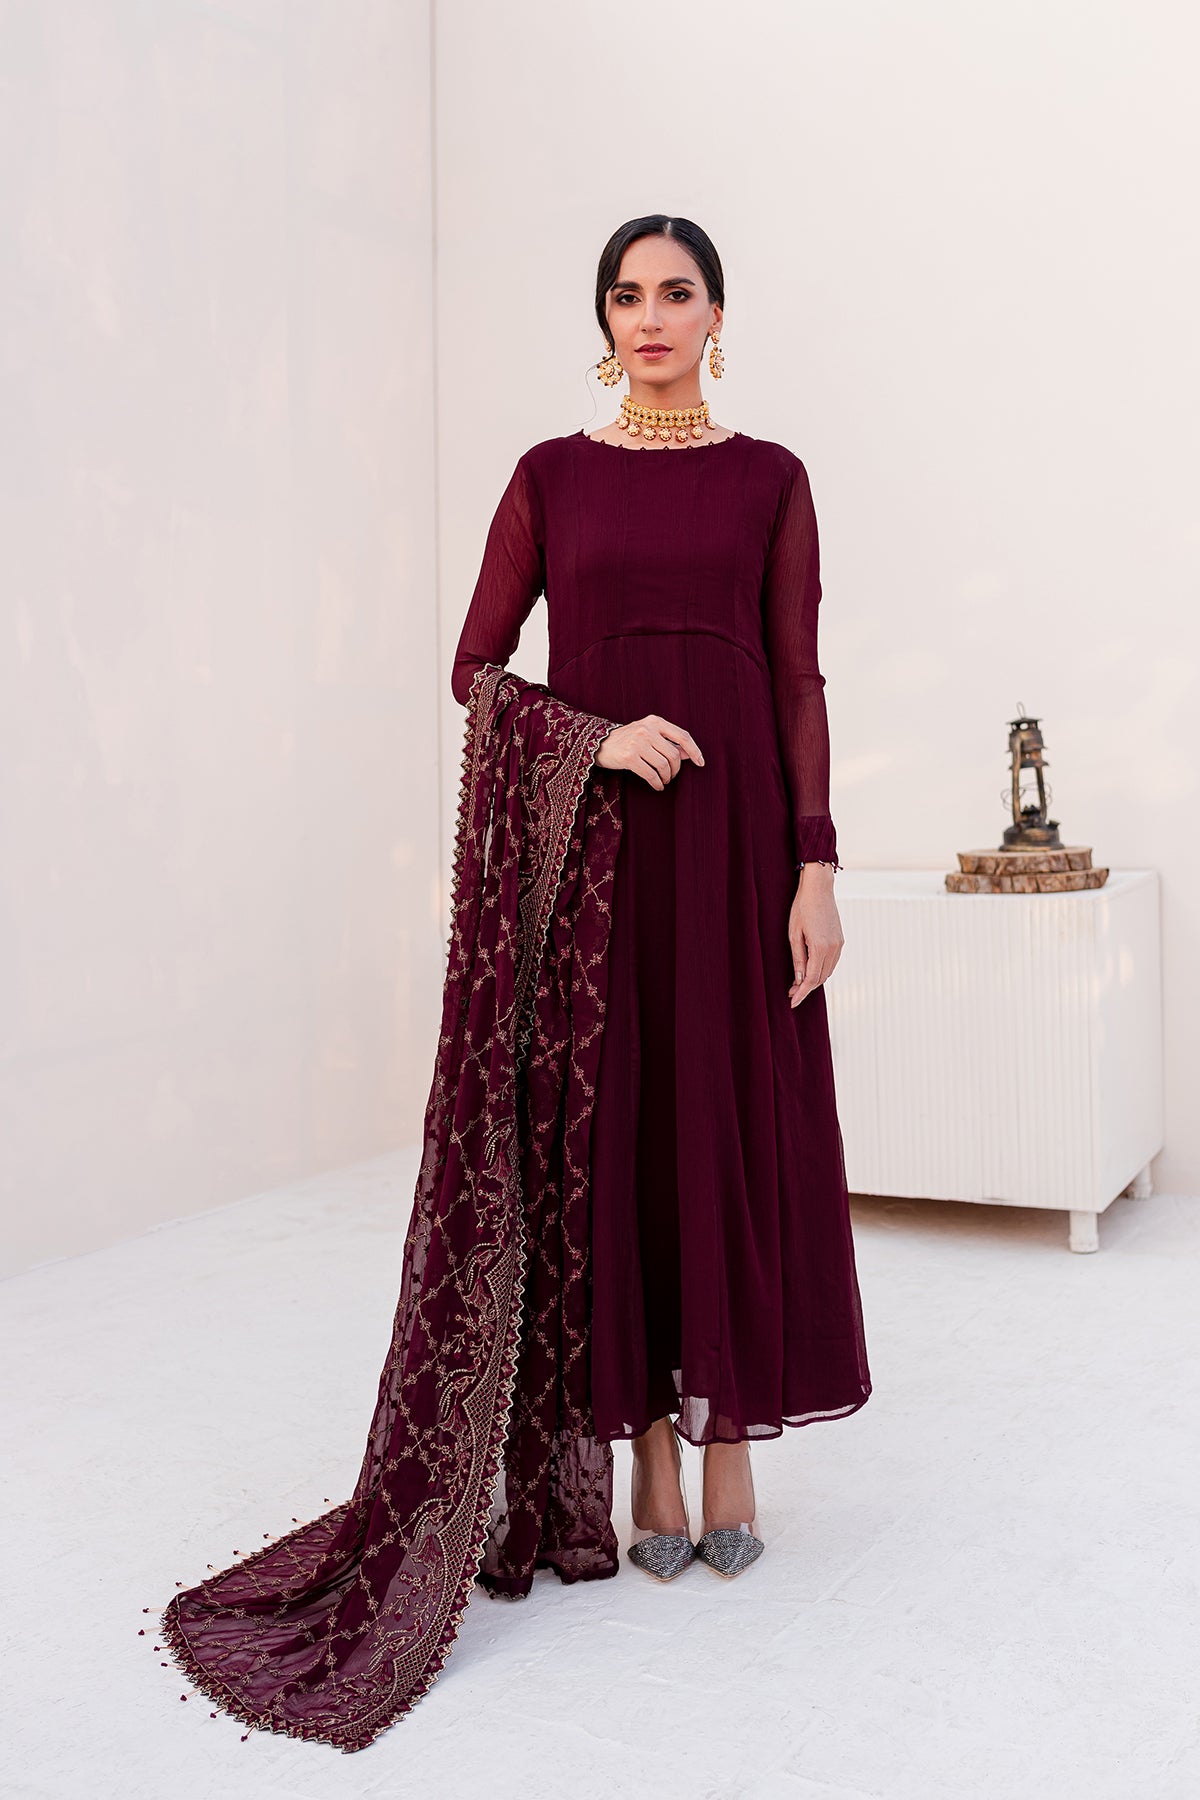 Ramzan Wholesale Shopping | Gowns, long Frocks, Gharara, Sharara Peplone  With Price, Hyd Life Suits | Ramzan Wholesale Shopping | Gowns, long  Frocks, Gharara, Sharara Peplone With Price, Hyd Life Suits #hydlife #